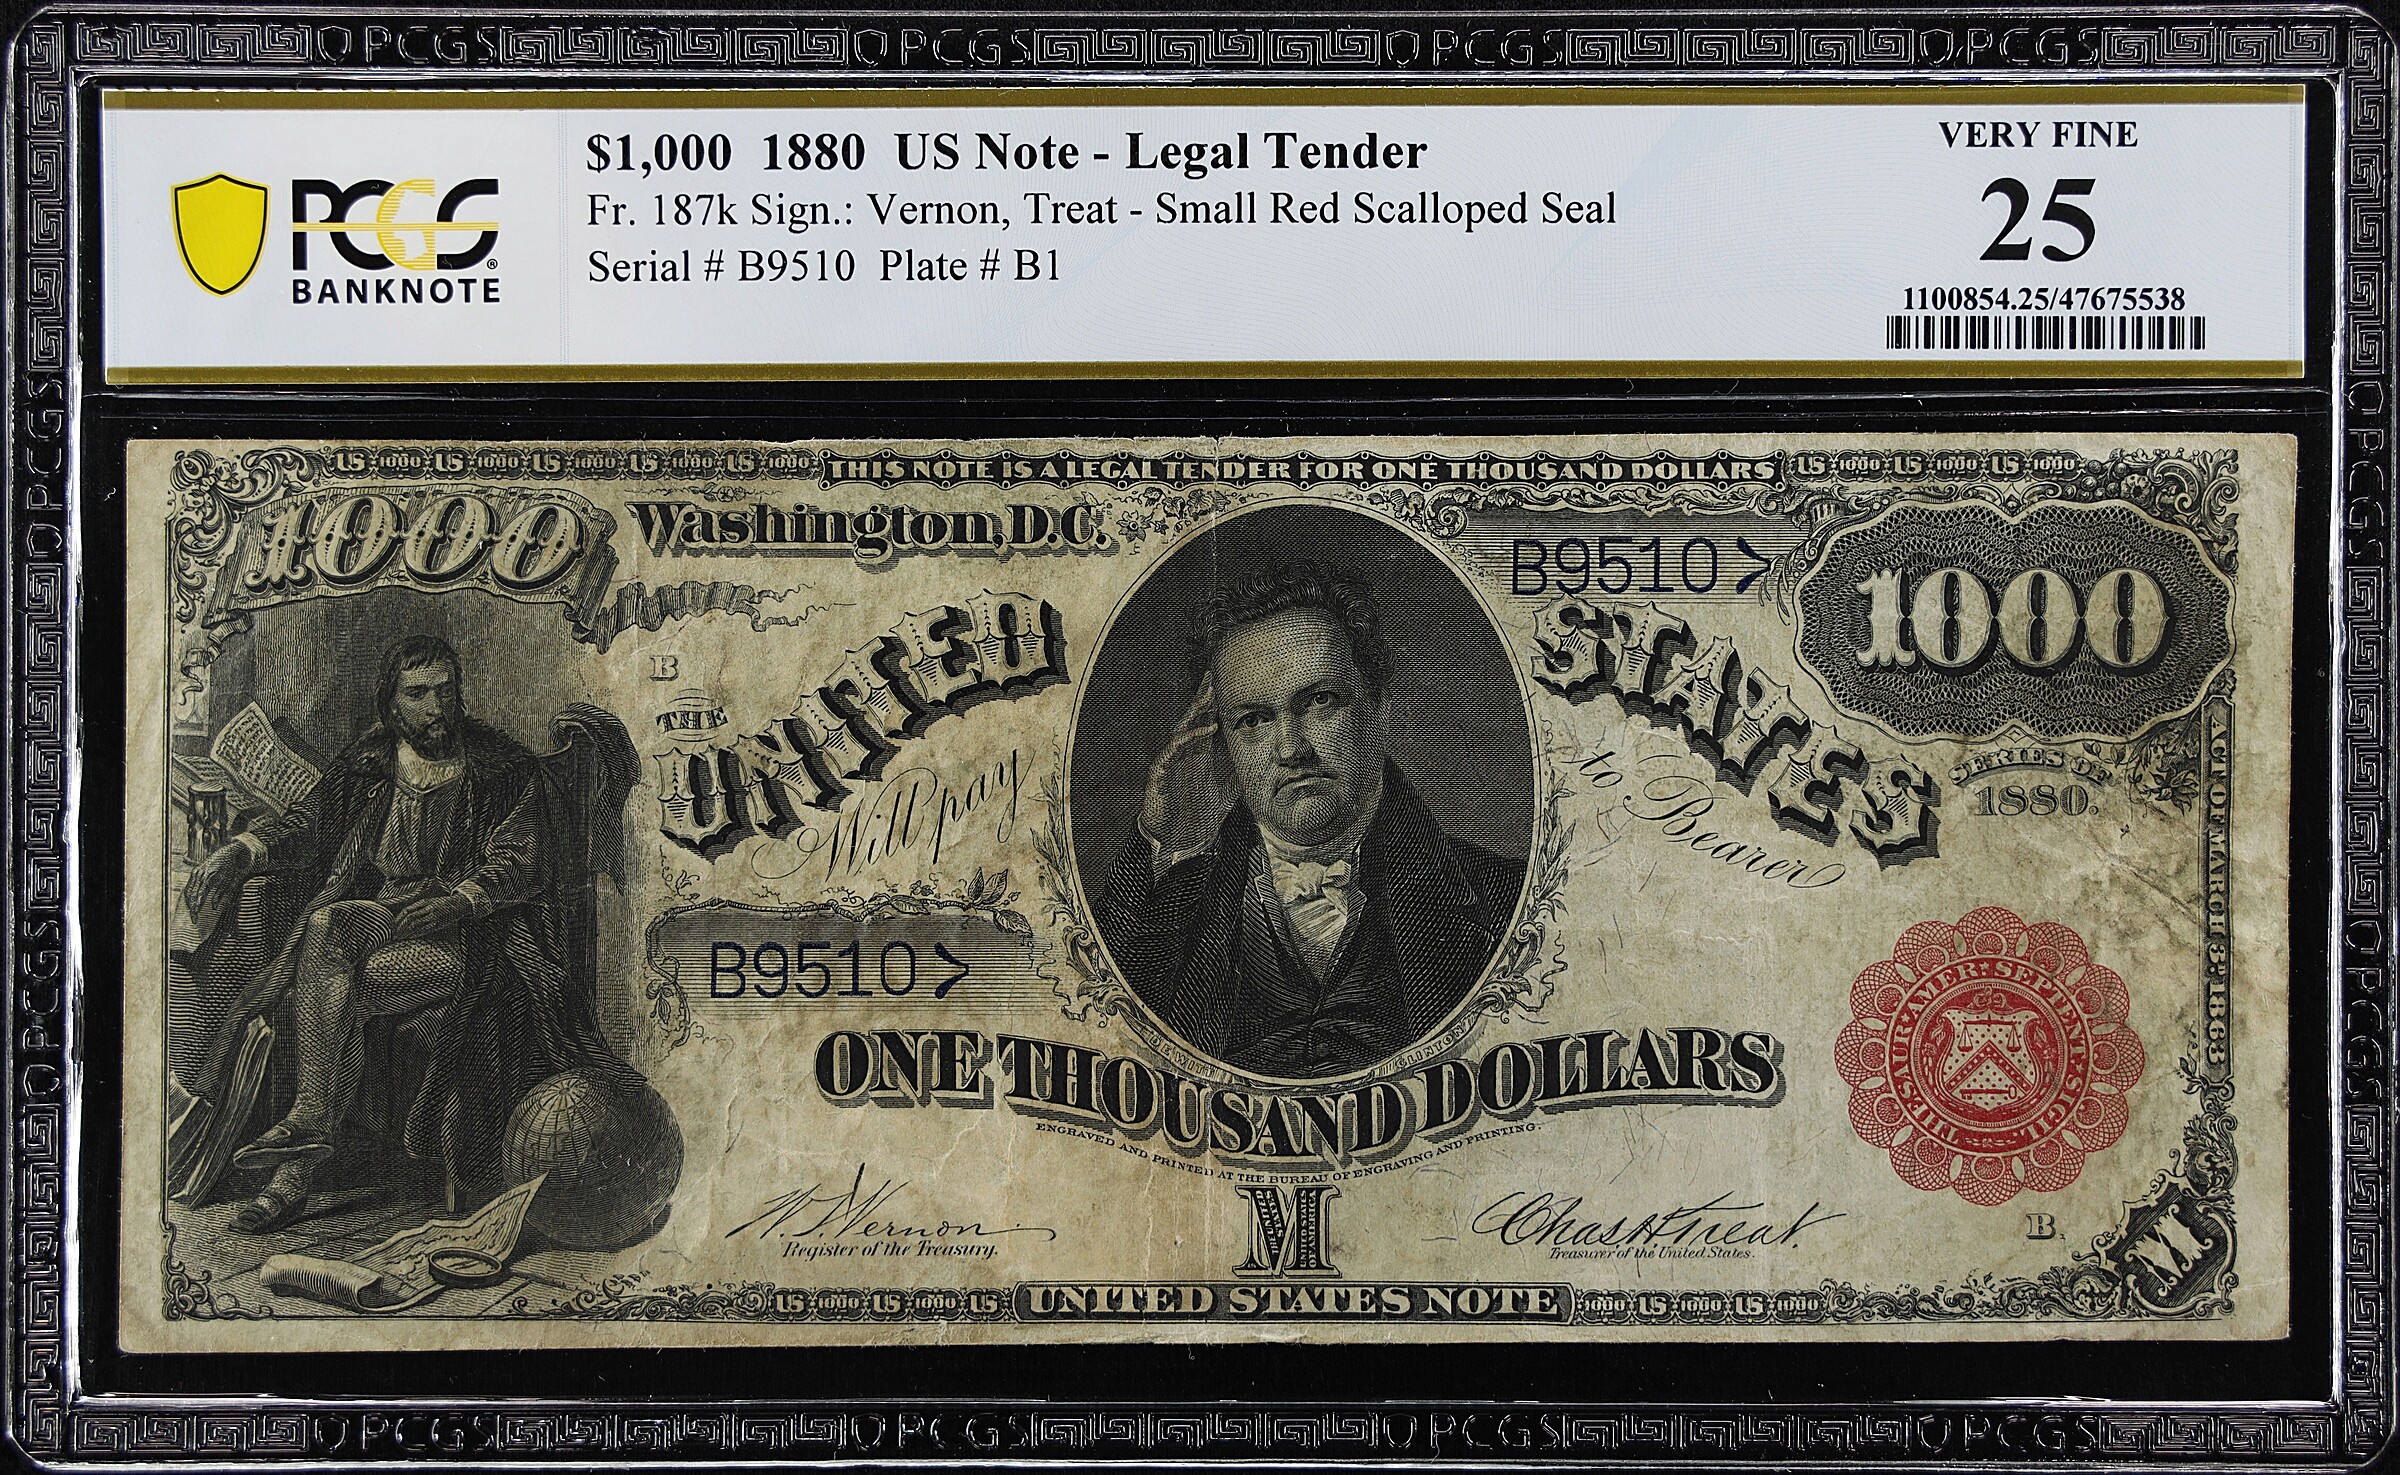 1,000 Dollars, Legal Tender Note, United States, 1880